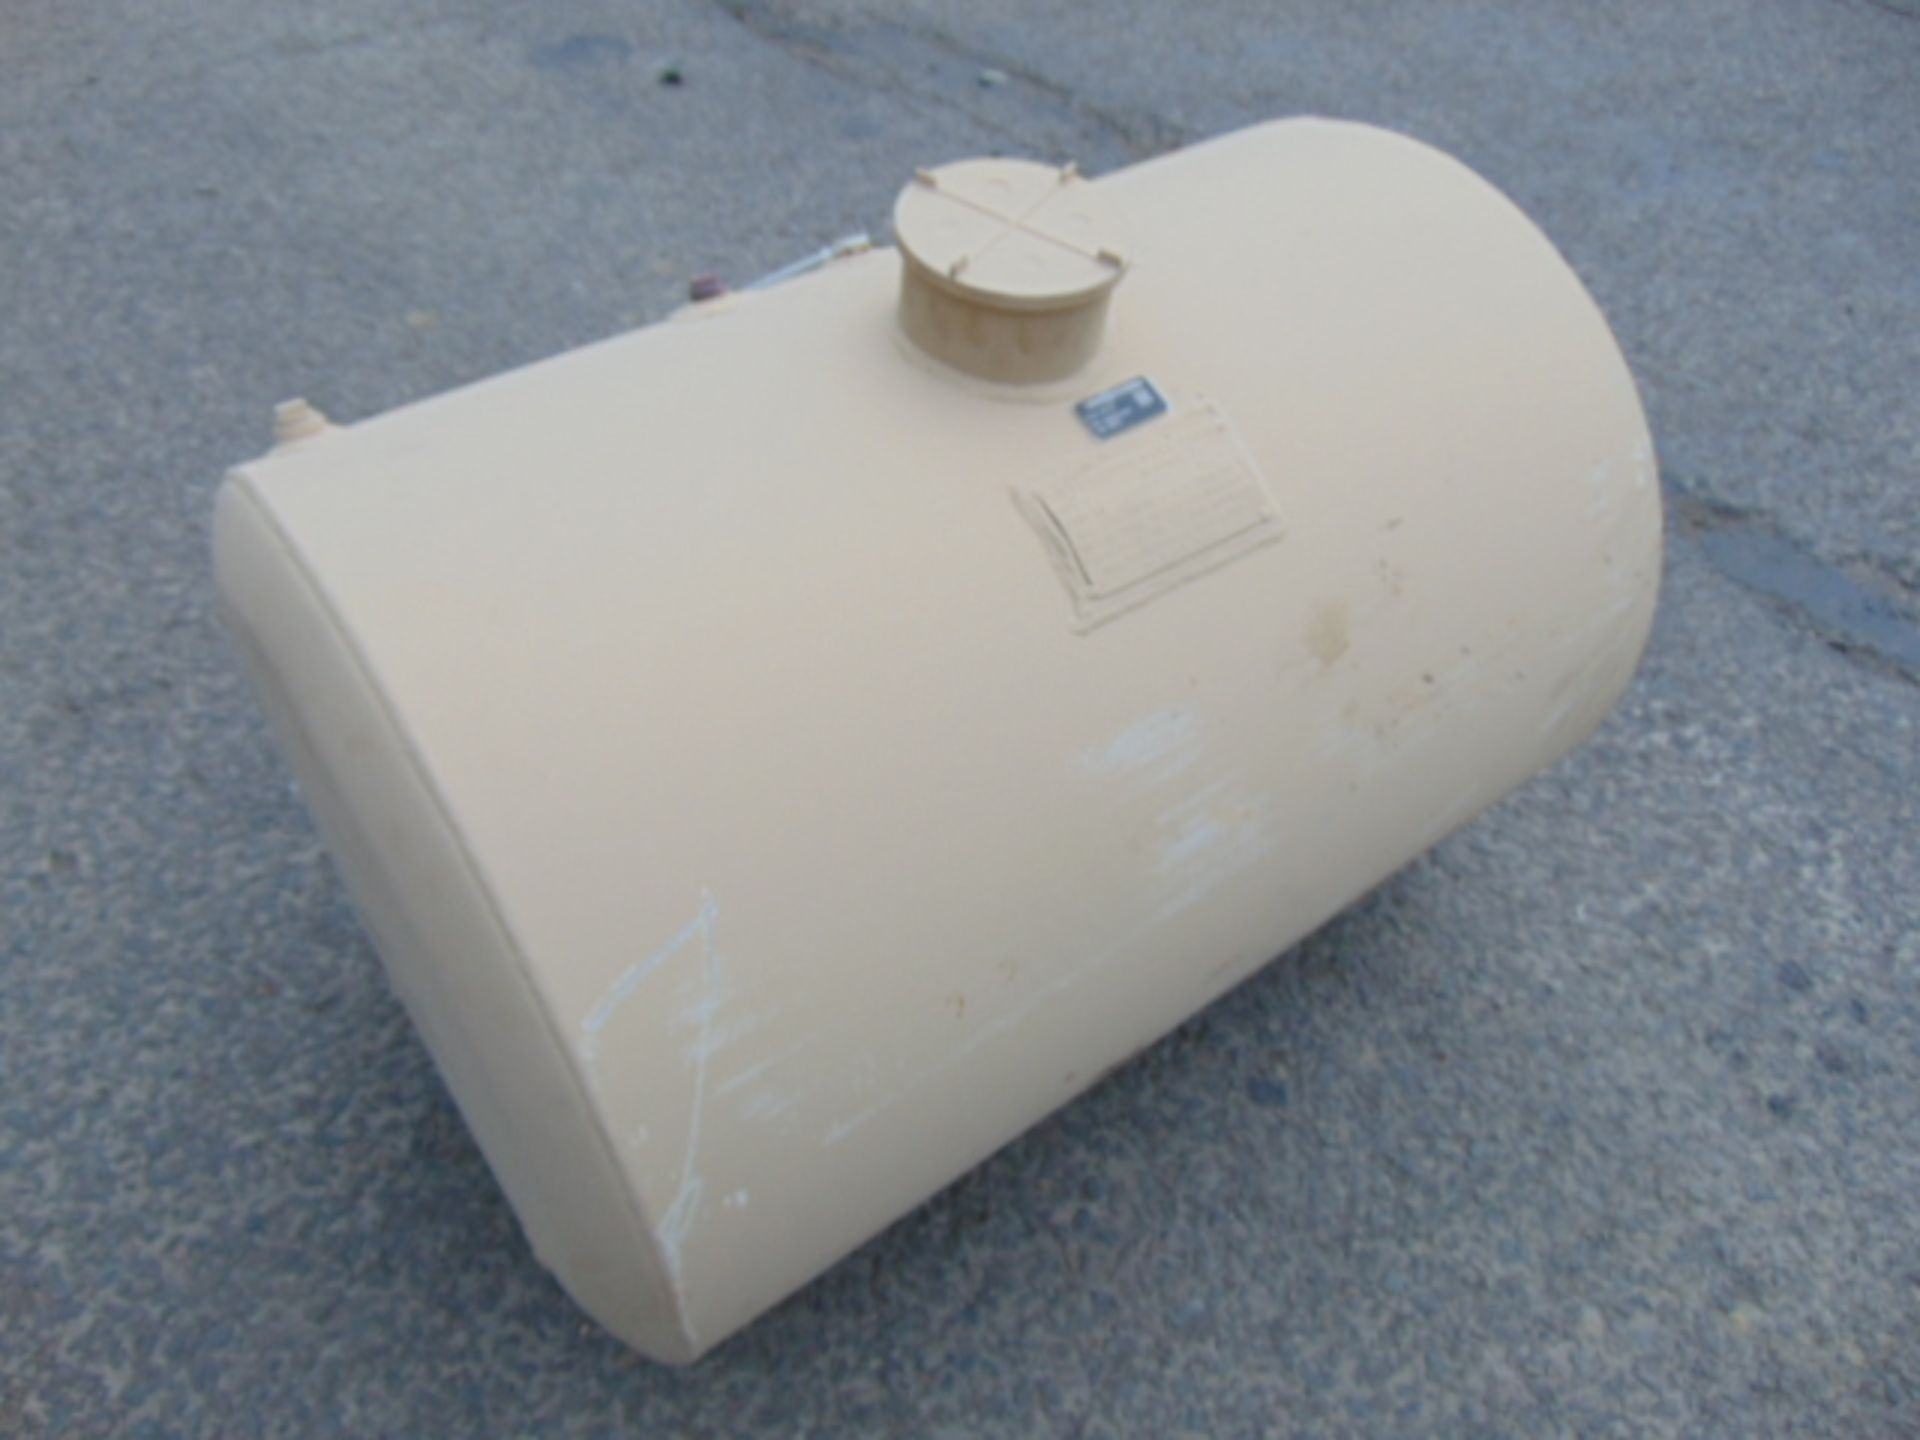 6 x Unissued Heavy Duty Automotive 51 US Gall Fuel Tanks - Image 2 of 6